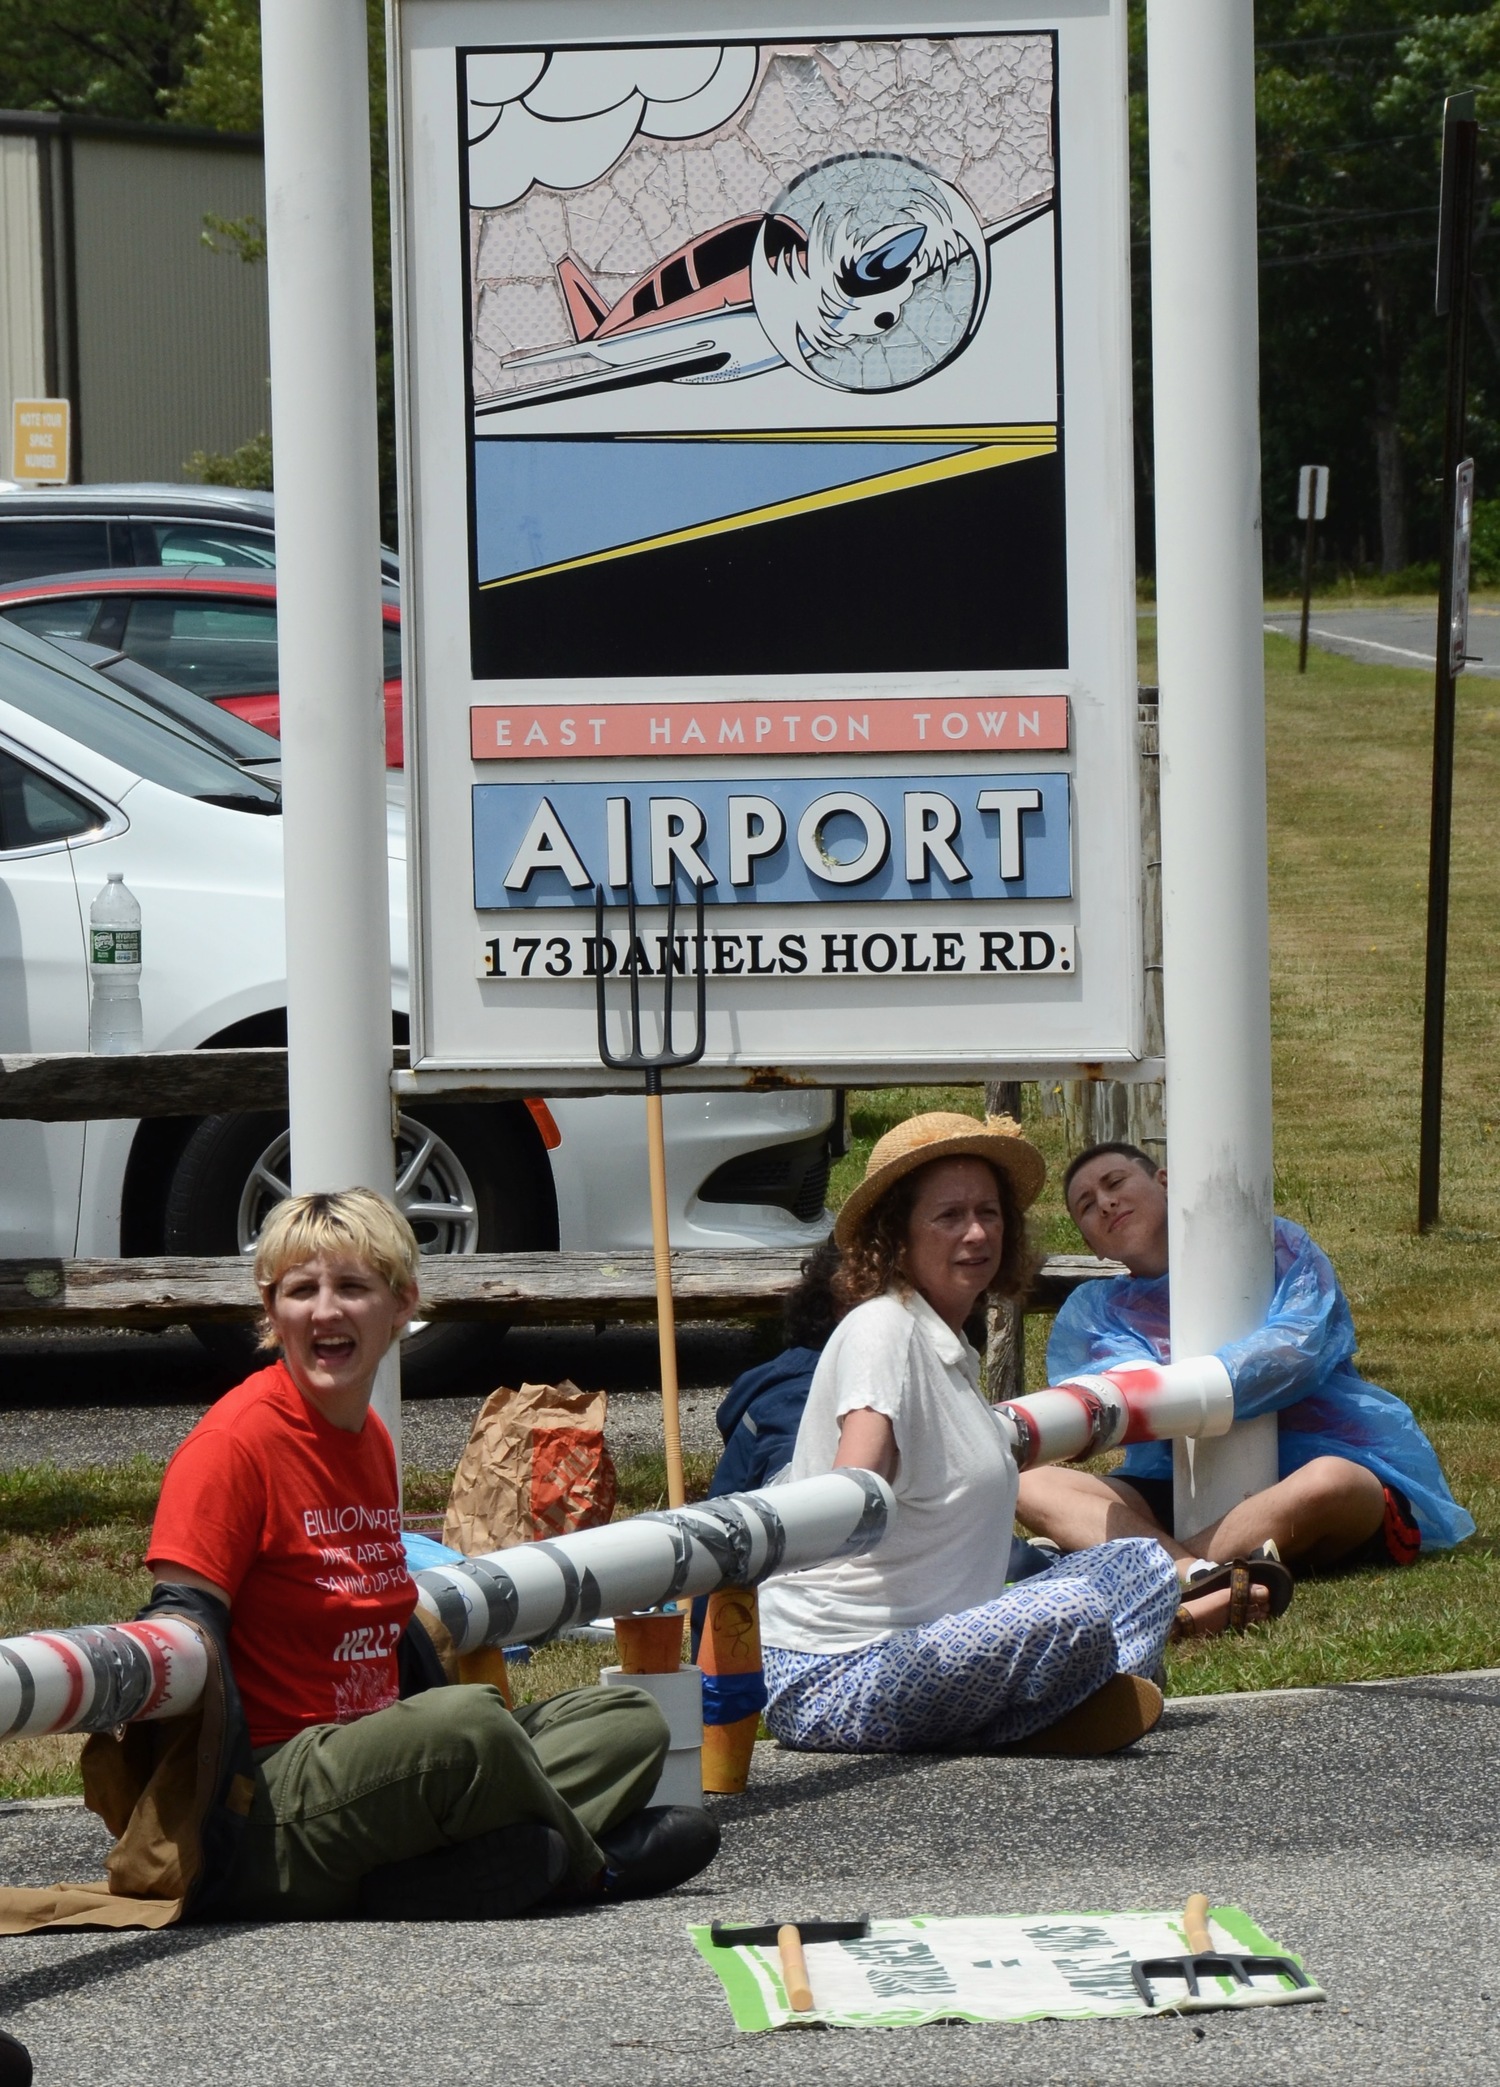 Protesters, including Abigail Disney, second from left, attempted to block access to East Hampton Airport on Friday afternoon, to protest the outsized contribution that private aircraft usage has on climate change.   KYRIL BROMLEY